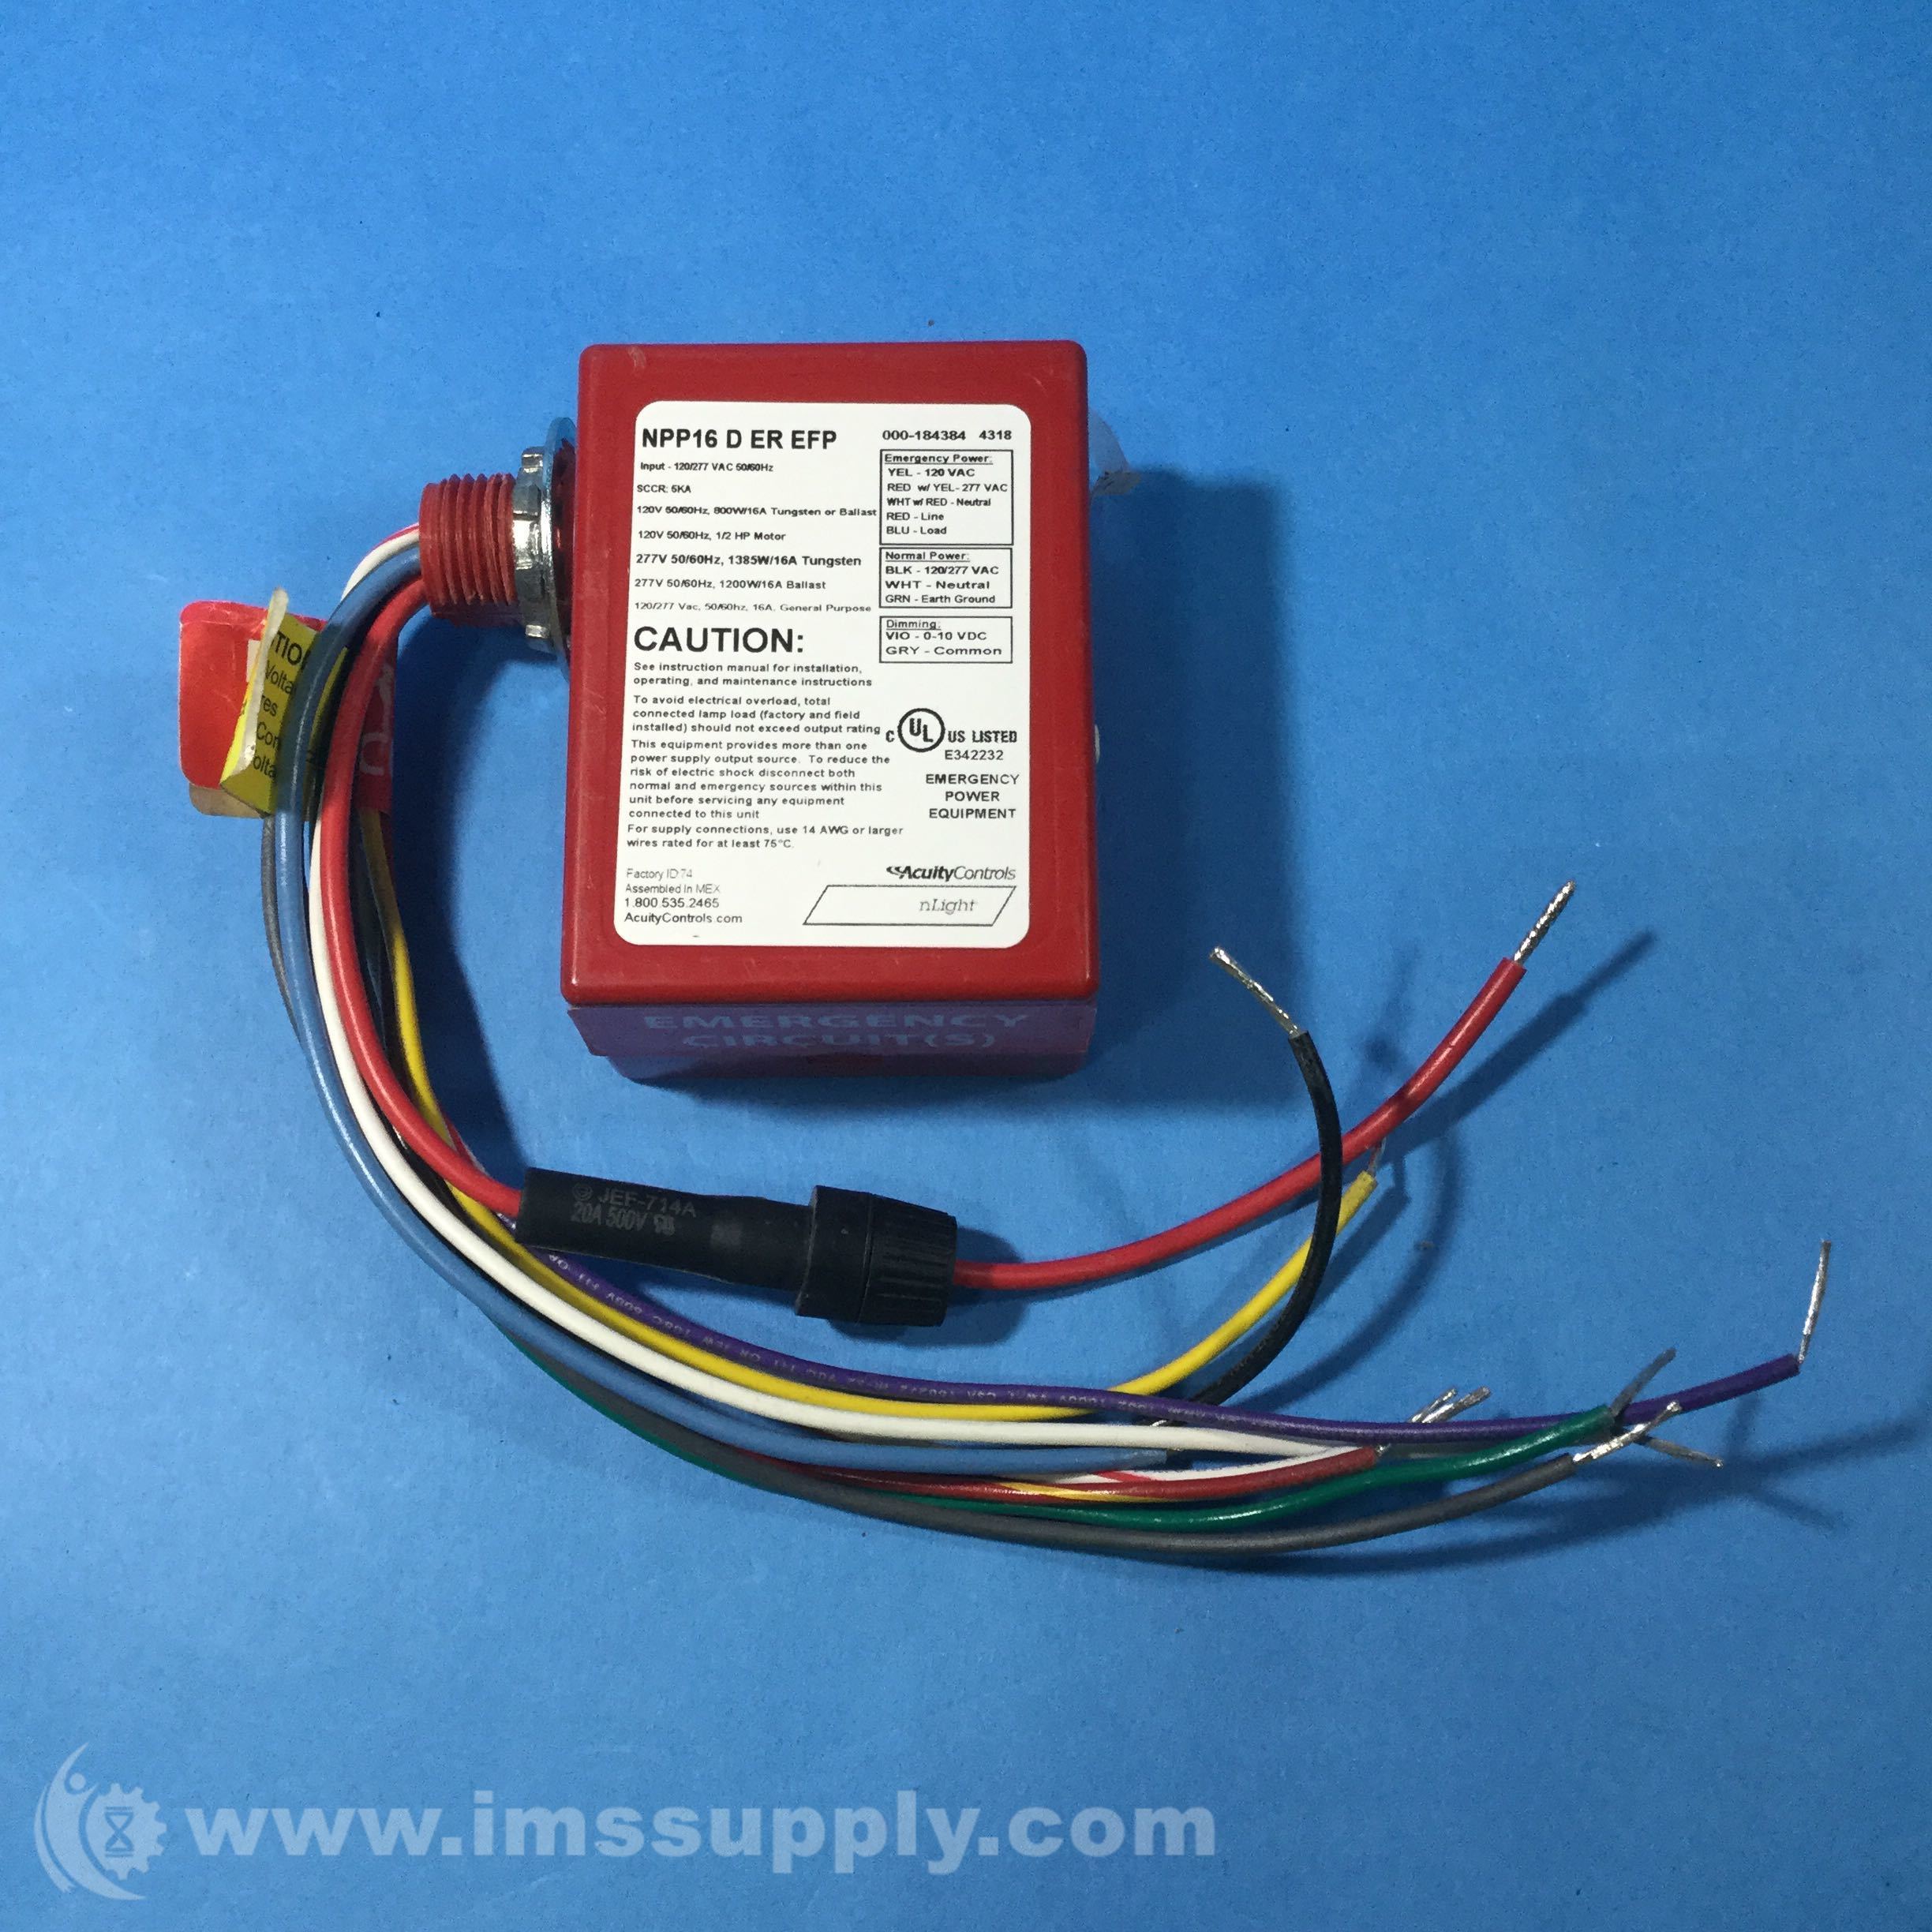 Acuity Controls NPP16 D ER EFP Power Relay Pack - IMS Supply